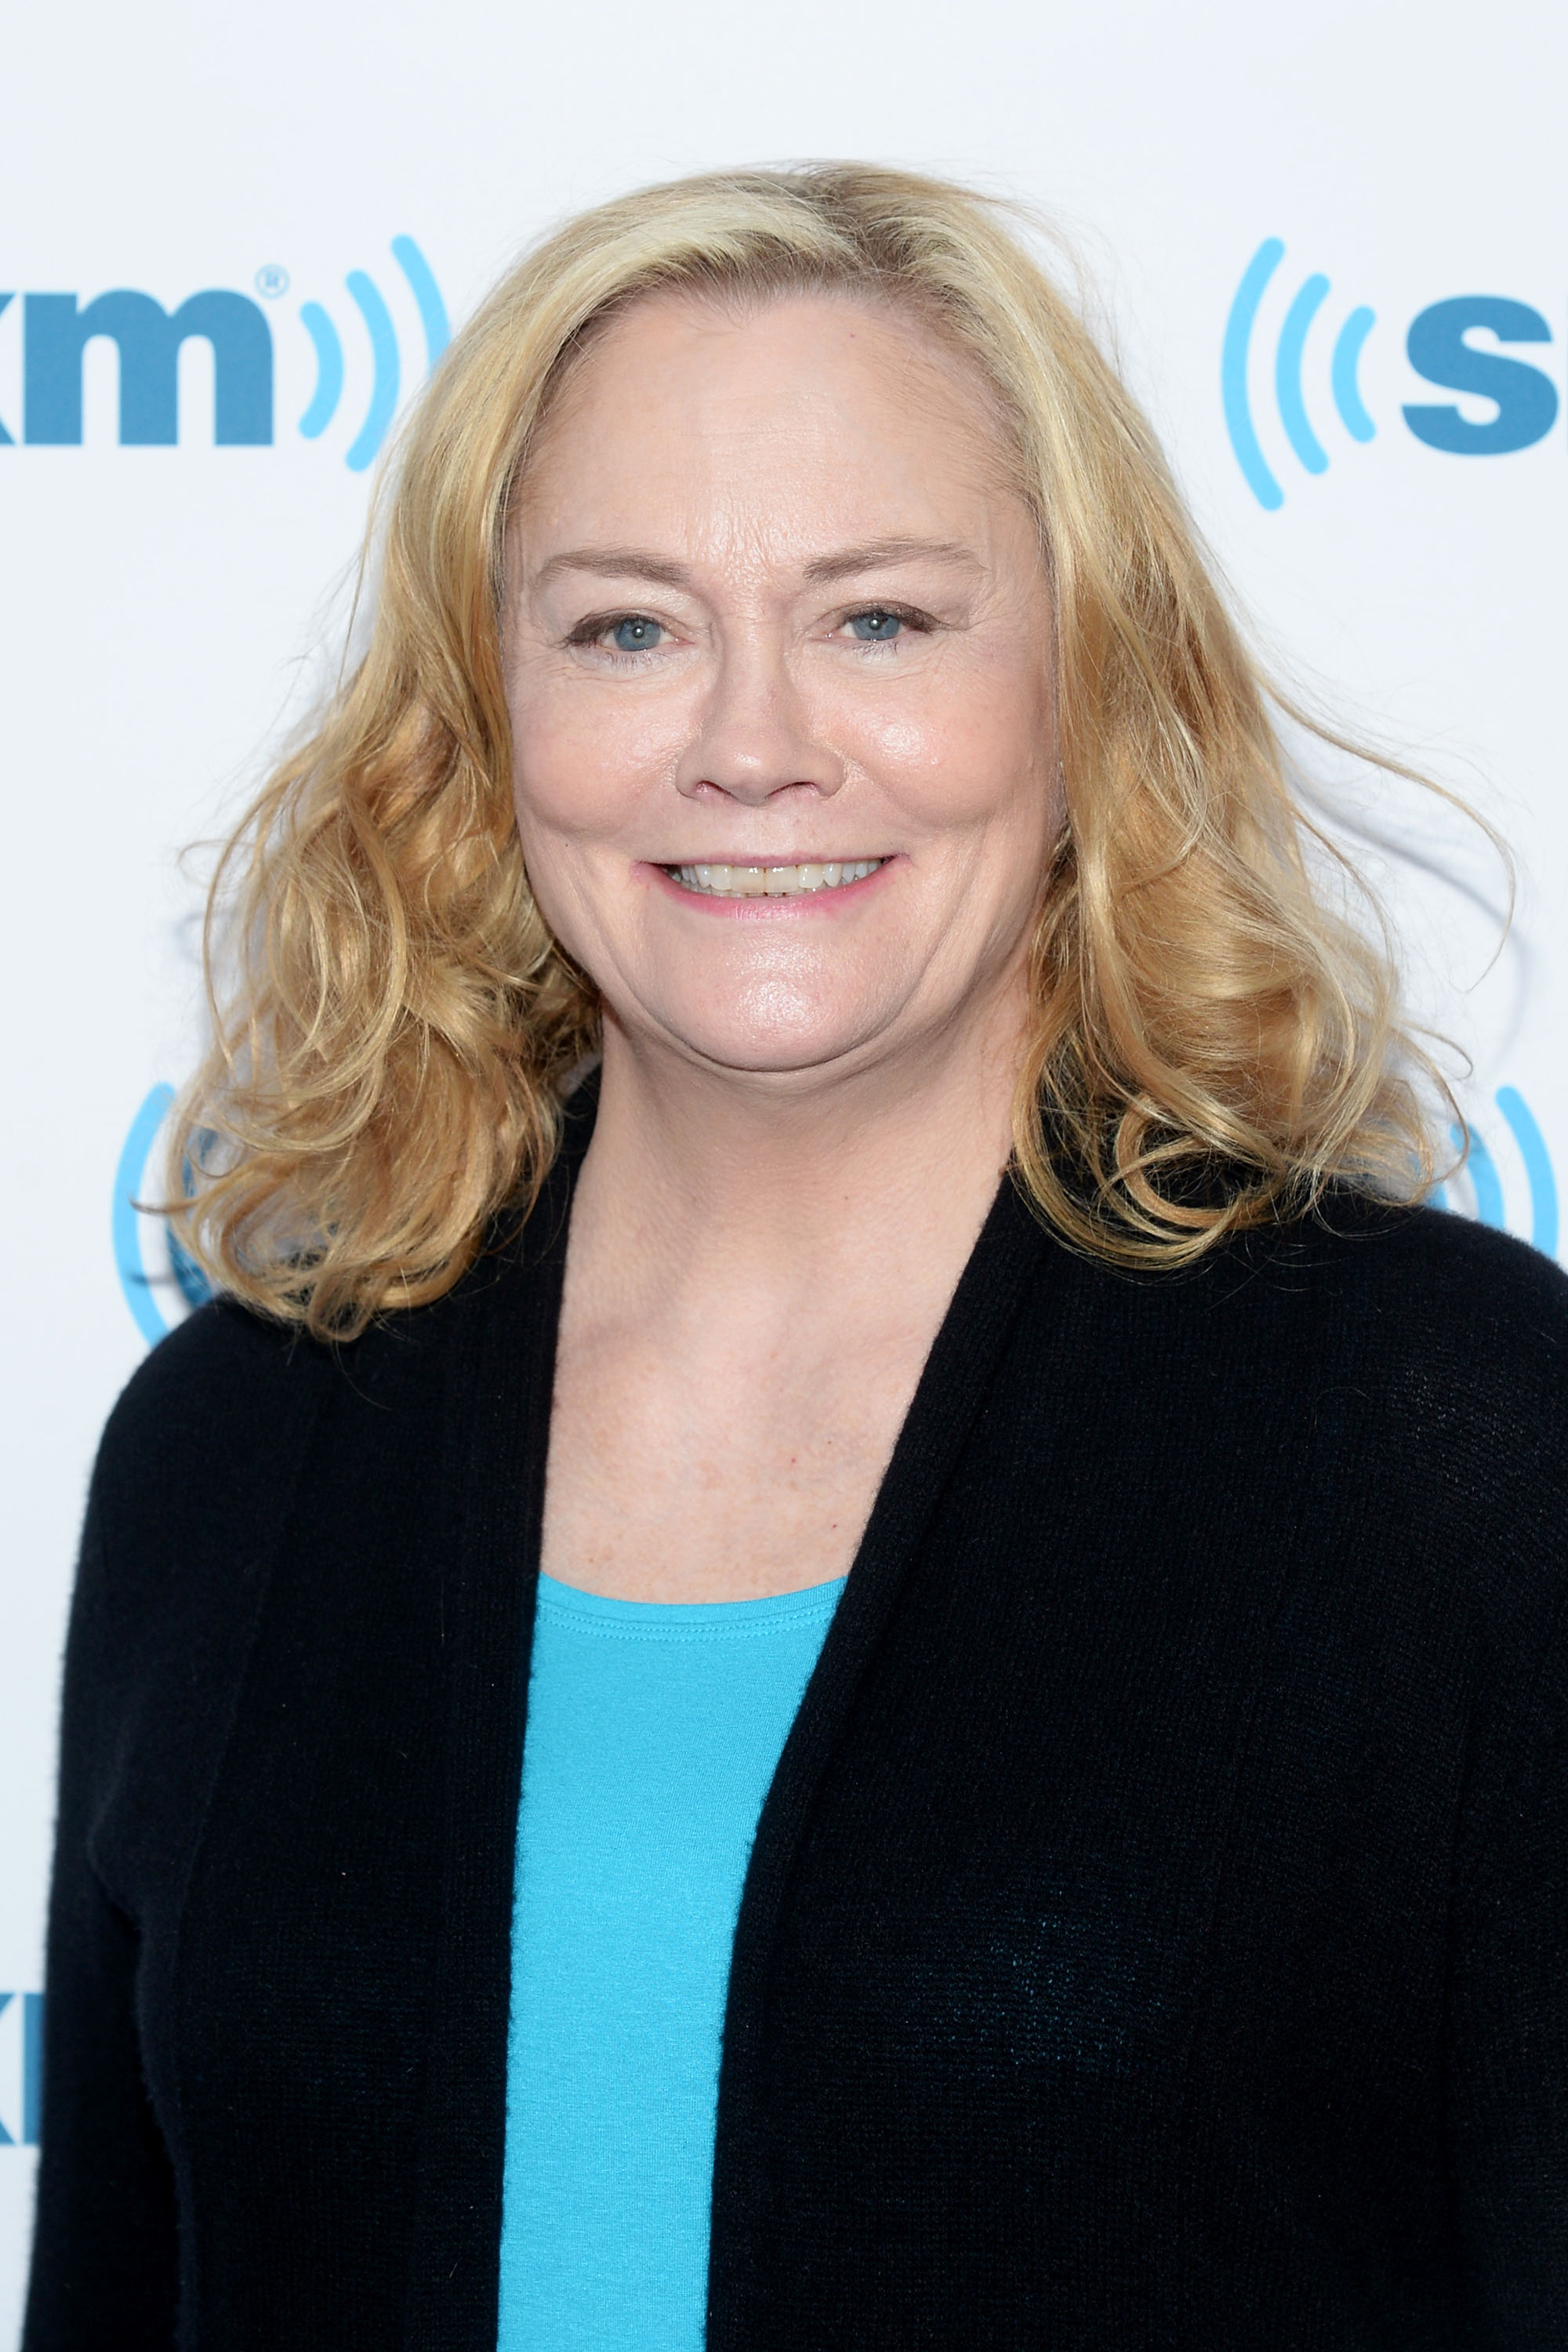 Cybill Shepherd at SiriusXM Studios on March 19, 2015, in New York City. | Source: Getty Images